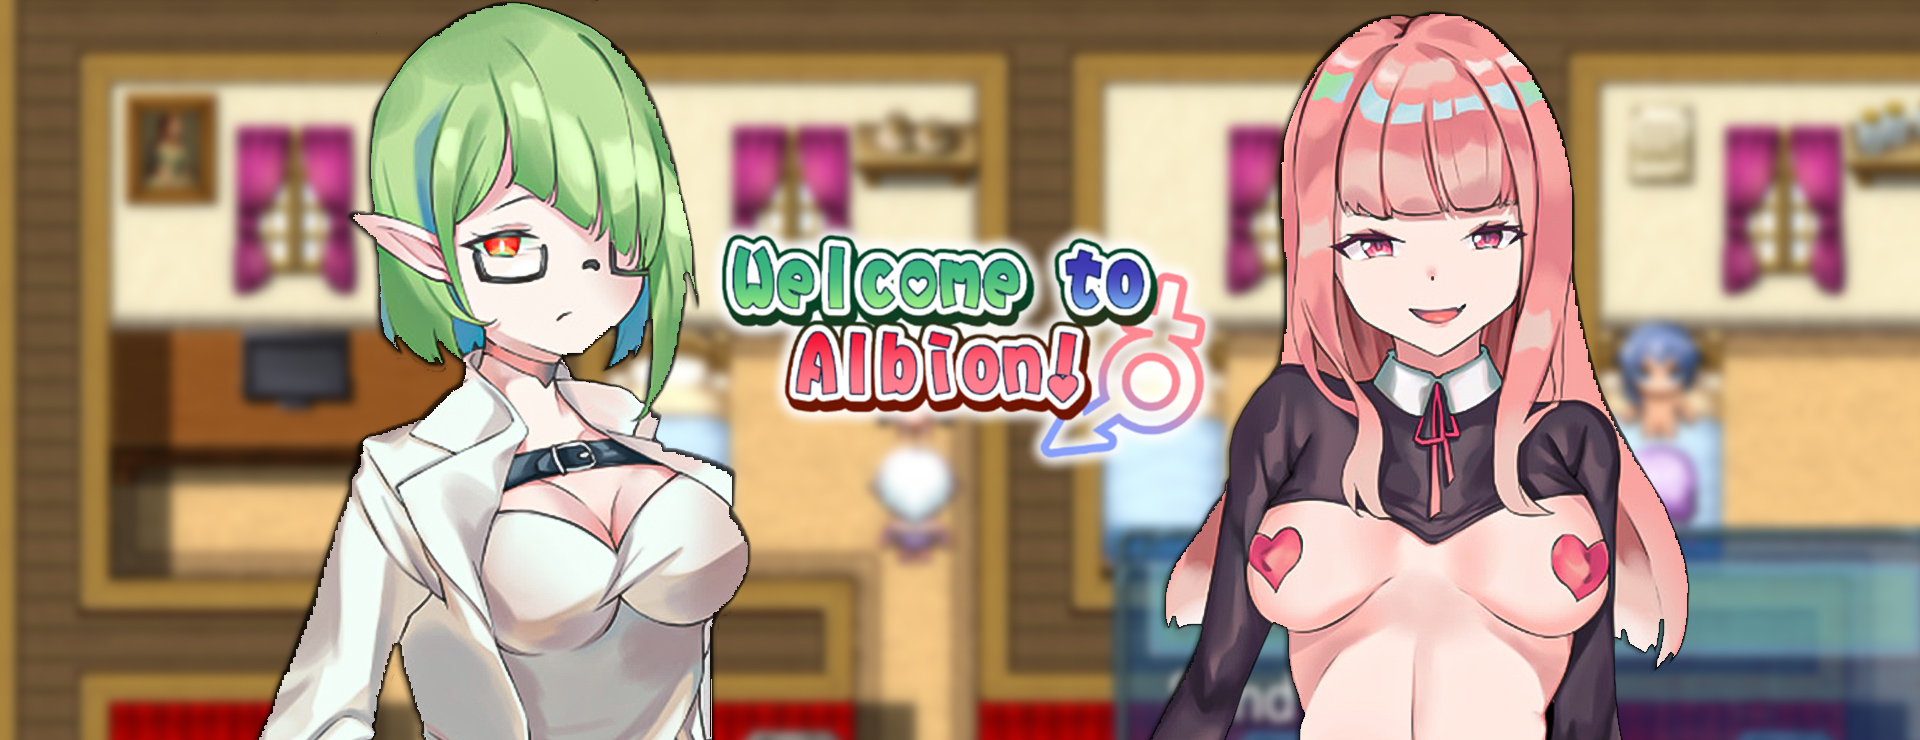 Welcome to Albion! - RPG Game